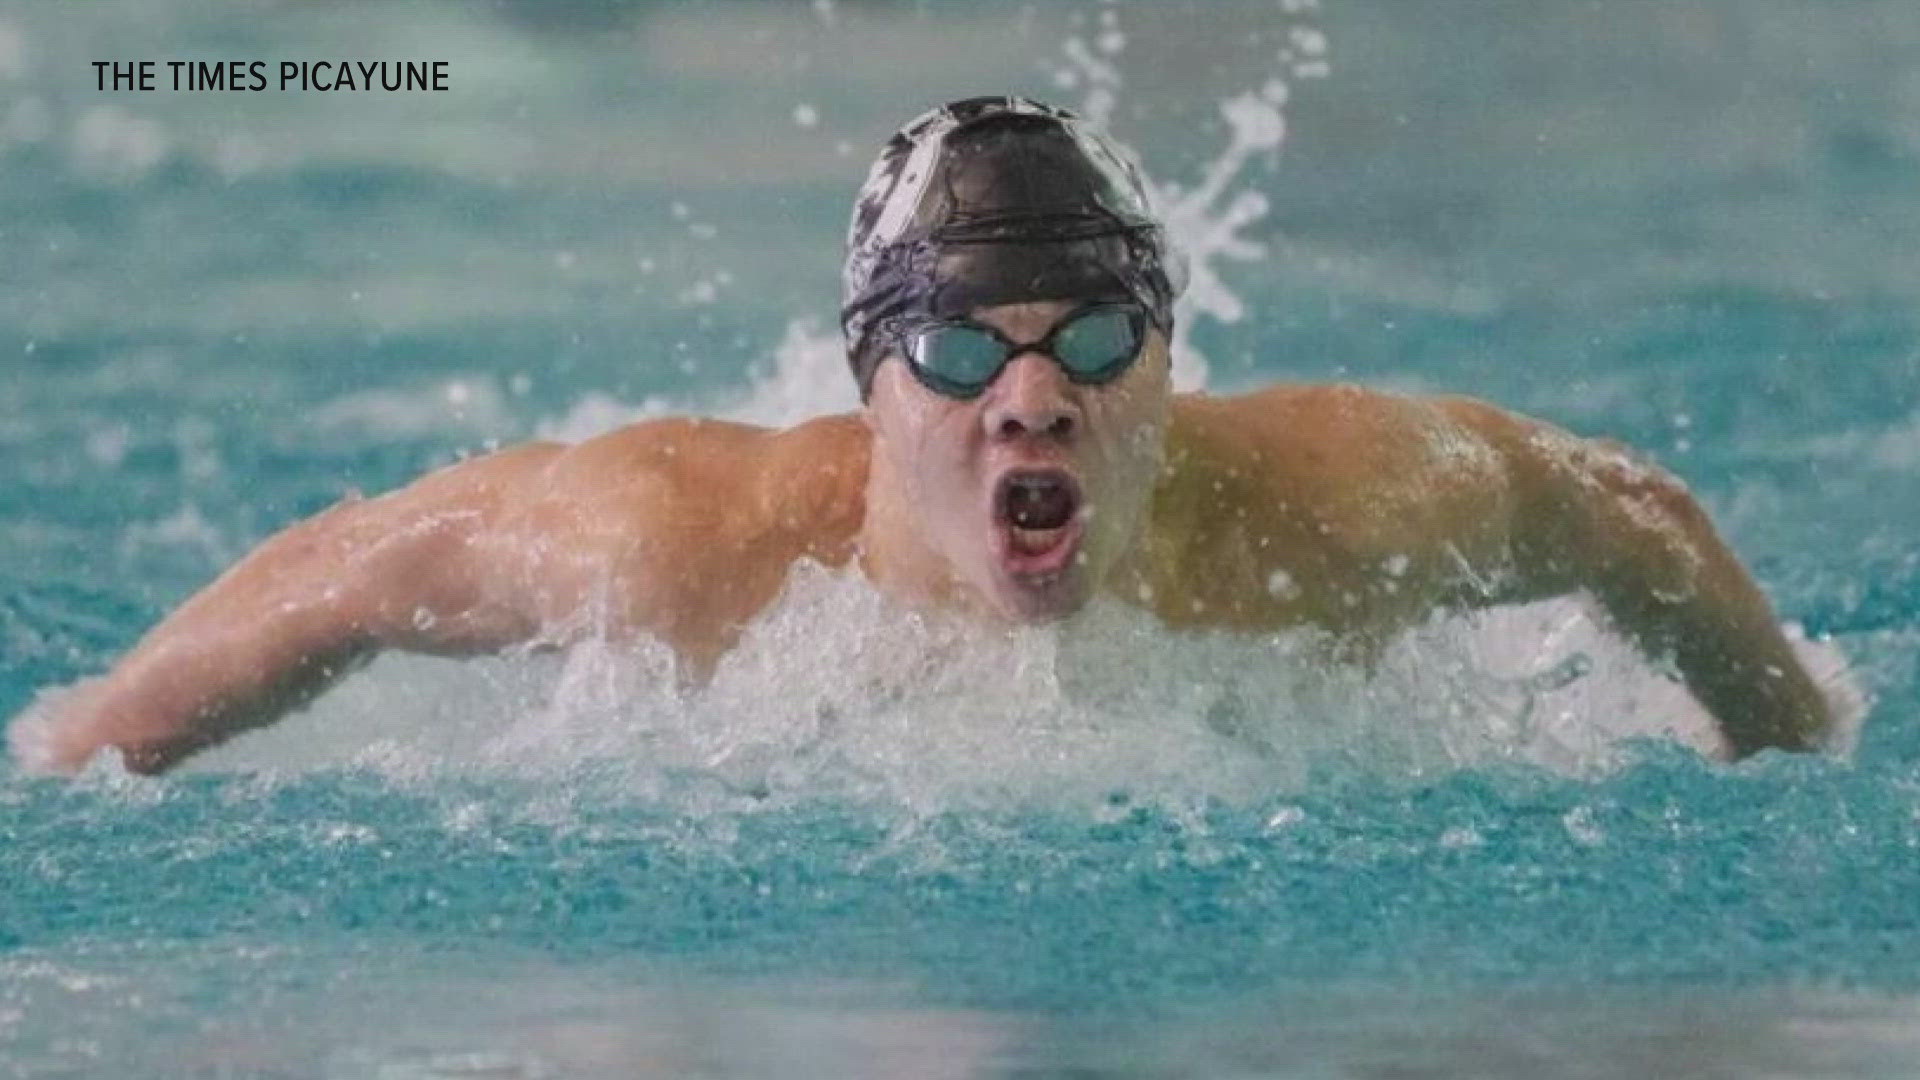 Two New Orleans area high school swimmers will compete at the U.S. Olympic swimming trials this week.